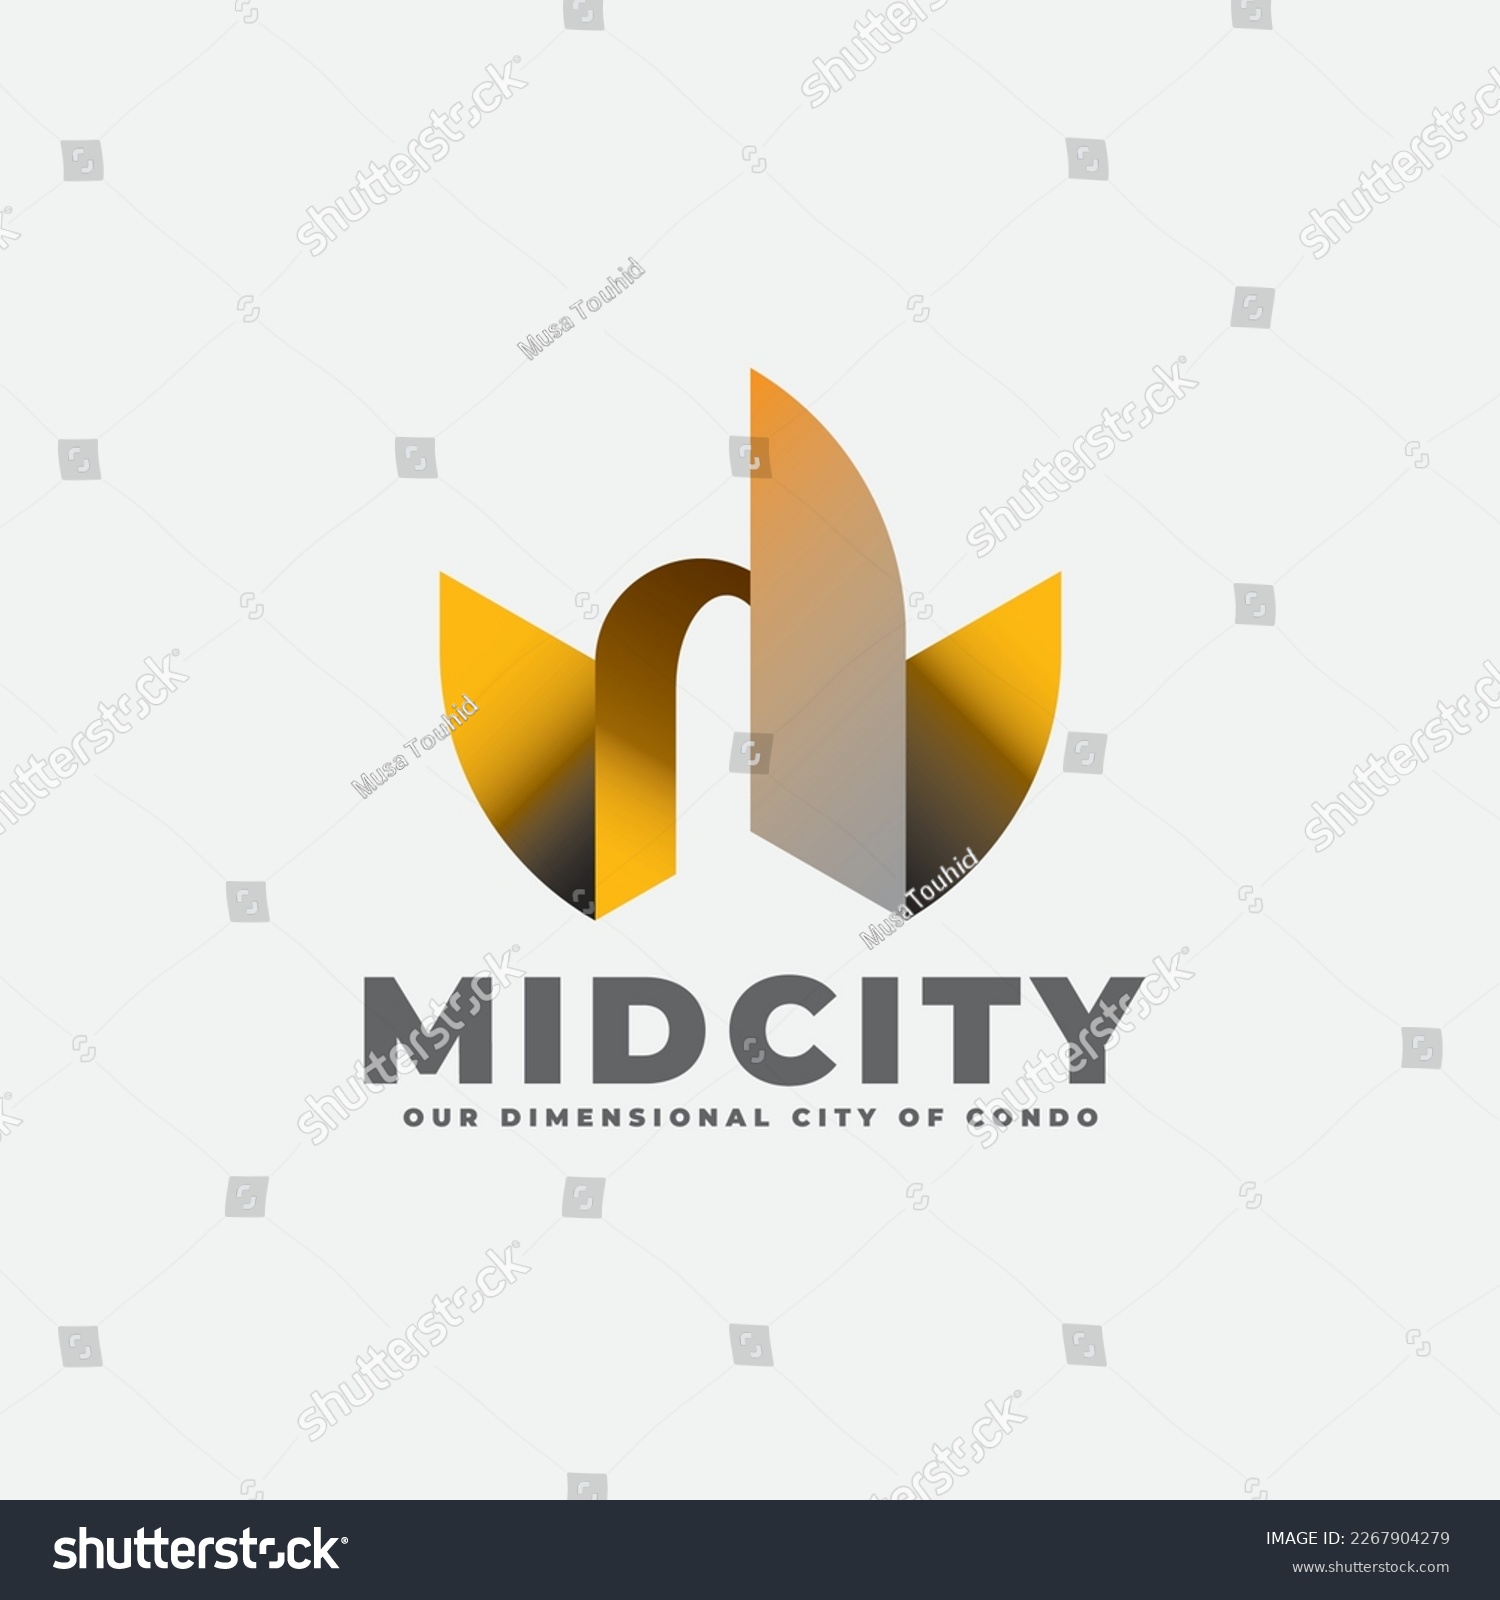 SVG of Logo is prepared for 3d exterior interior design concept, corporate and industrial events replica model and overall for visual architecture brand. svg